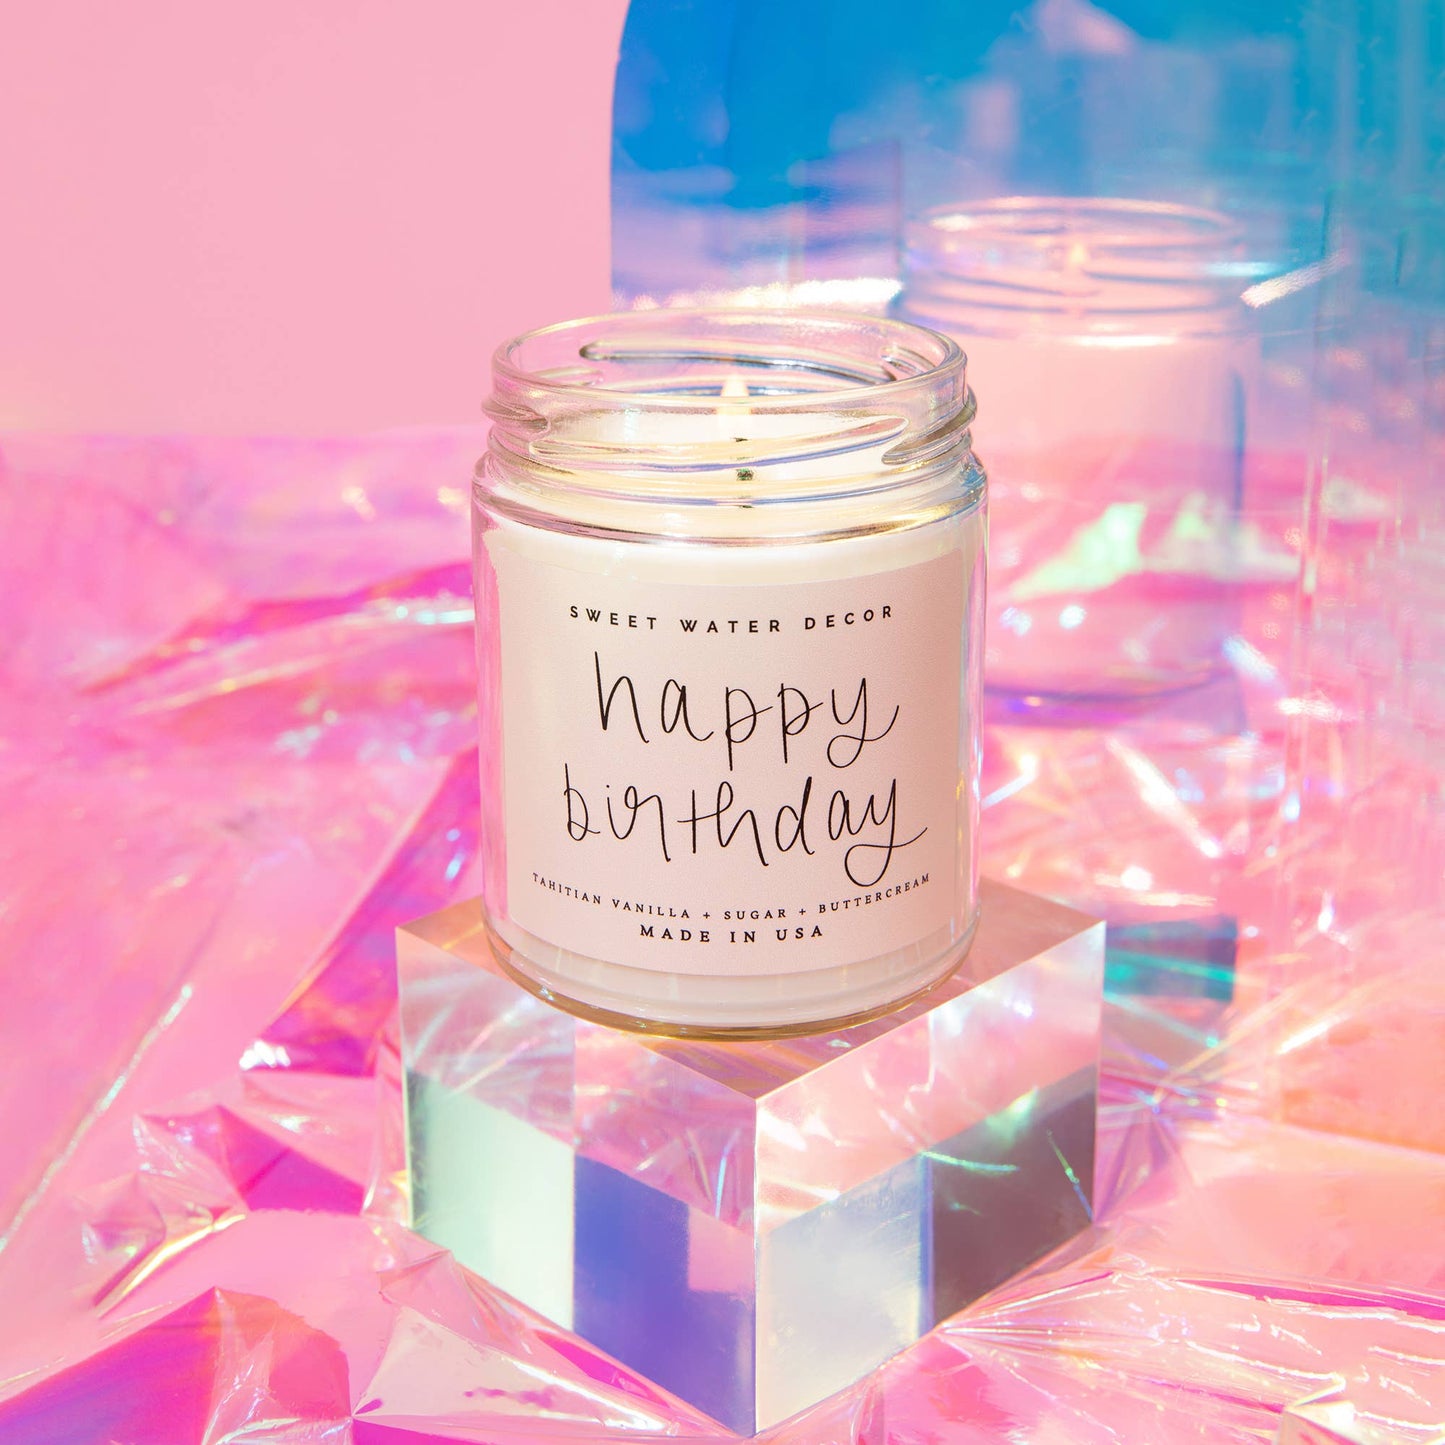 Sweet Water Decor - Happy Birthday - 9 oz. Soy Candle